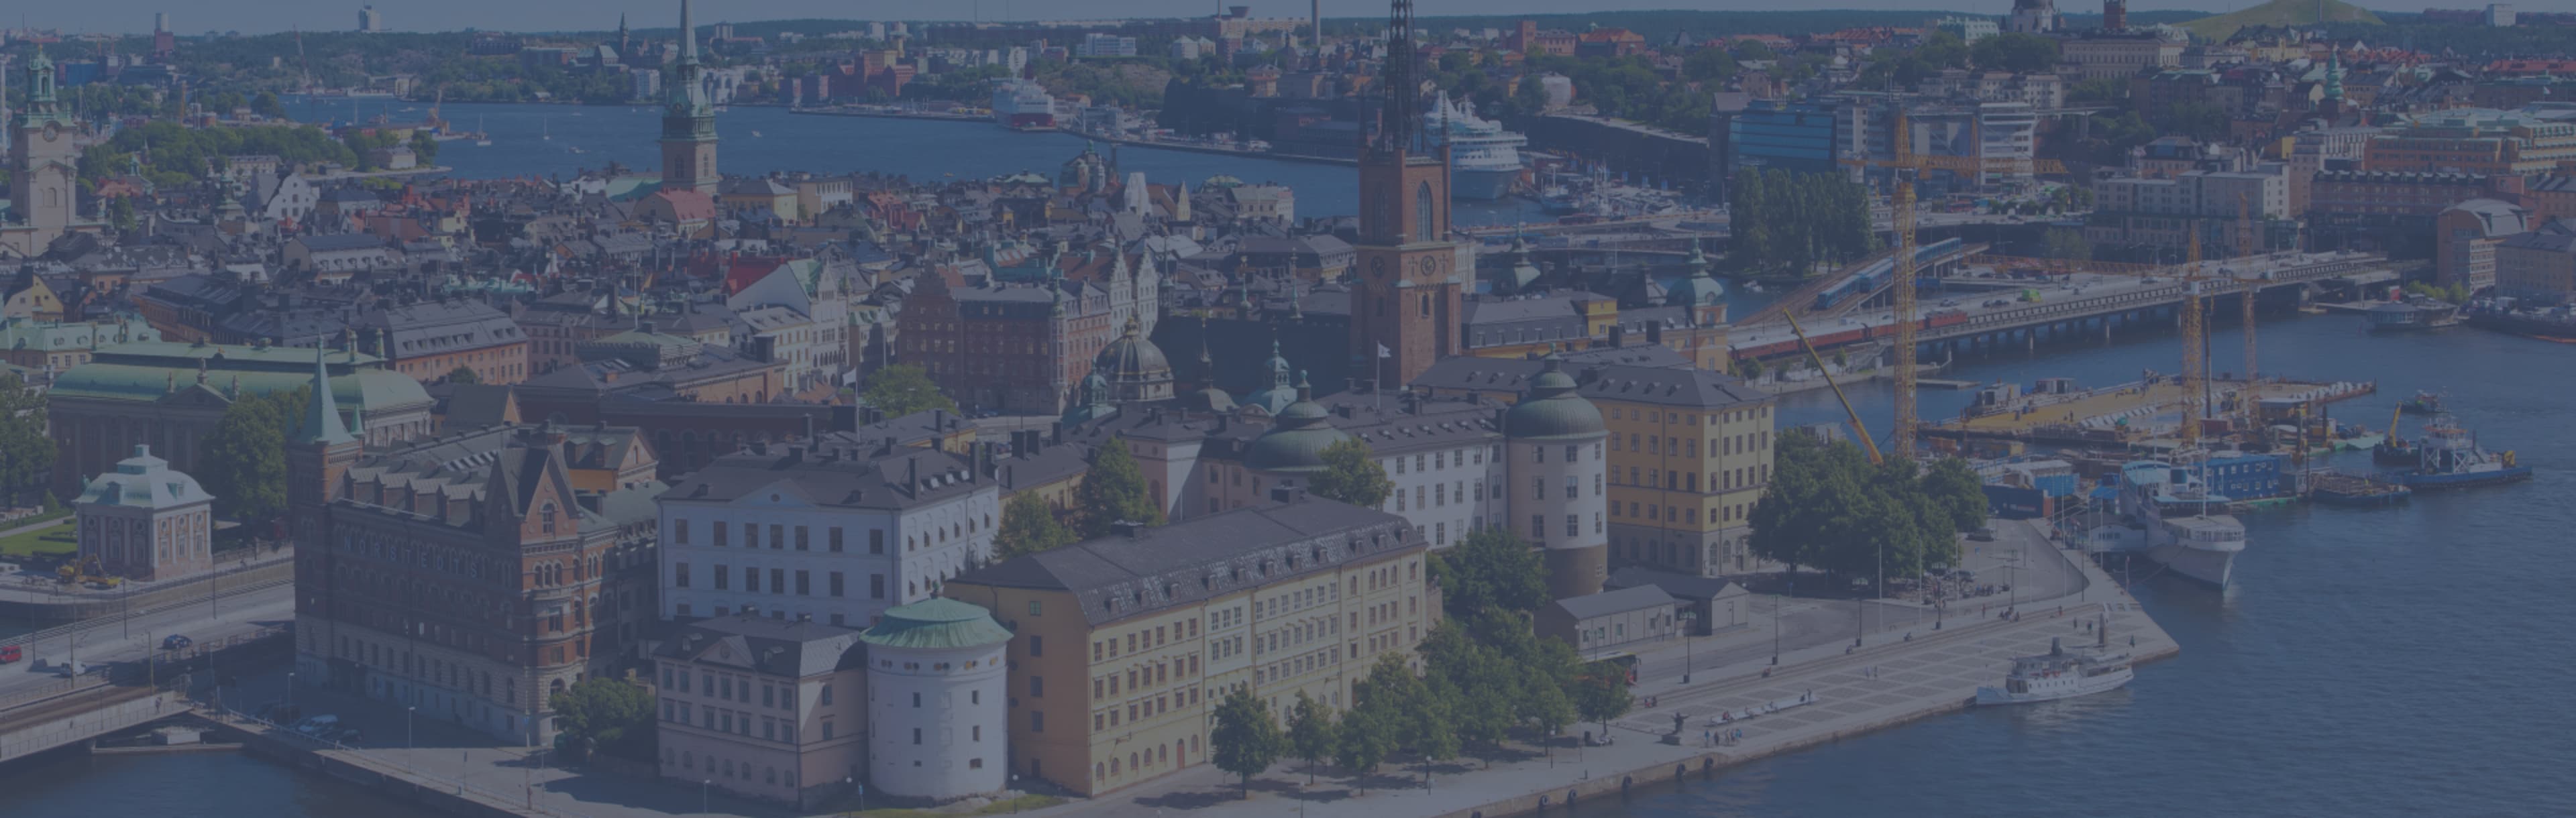 Stockholm University, Department of Computer and System Sciences (DSV) Online Master's Programme in IT-Project Management for distance studies